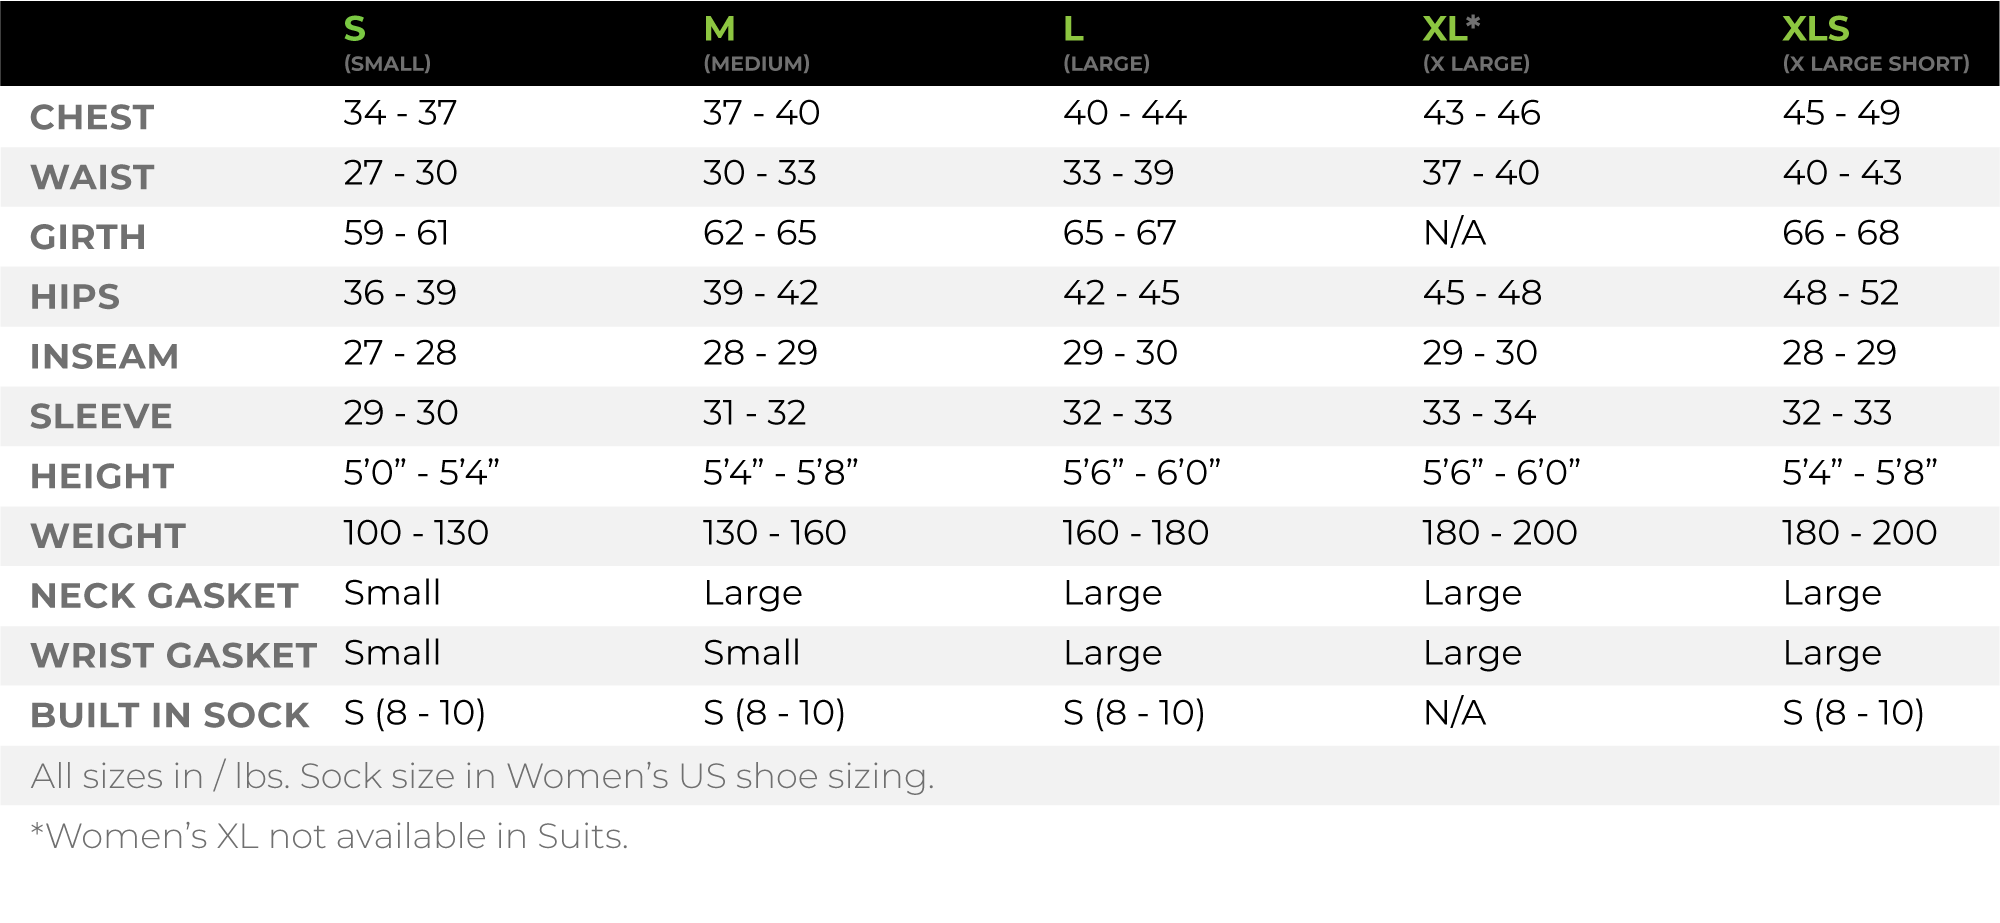 WOMEN'S SIZING CHART in INCHES. 
S (small)
chest	34 - 37
waist	27 - 30
girth	59 - 61
hips	36 - 39
inseam	27 - 28
sleeve	29 - 30
height	5’0” - 5’4”
weight	100 - 130
neck gasket	Small
wrist gasket	Small
built in sock	S (8 - 10)
M (medium)
chest	37 - 40
waist	30 - 33
girth	62 - 65
hips	39 - 42
inseam	28 - 29
sleeve	31 - 32
height	5’4” - 5’8”
weight	130 - 160
neck gasket	Large
wrist gasket	Small
built in sock	S (8 - 10)
L (large)
chest	40 - 44
waist	33 - 39
girth	65 - 67
hips	42 - 45
inseam	29 - 30
sleeve	32 - 33
height	5’6” - 6’0”
weight	160 - 180
neck gasket	Large
wrist gasket	Large
built in sock	S (8 - 10)
XL (x large)
chest	43 - 46
waist	37 - 40
girth	N/A
hips	45 - 48
inseam	29 - 30
sleeve	33 - 34
height	5’6” - 6’0”
weight	180 - 200
neck gasket	Large
wrist gasket	Large
built in sock	N/A
XLS (x large short)
chest	45 - 49
waist	40 - 43
girth	66 - 68
hips	48 - 52
inseam	28 - 29
sleeve	32 - 33
height	5’4” - 5’8”
weight	180 - 200
neck gasket	Large
wrist gasket	Large
built in sock	S (8 - 10)
All sizes inches / pounds. Sock size in Women’s U.S. shoe sizing. 
*Women’s X.L. not available in Suits.